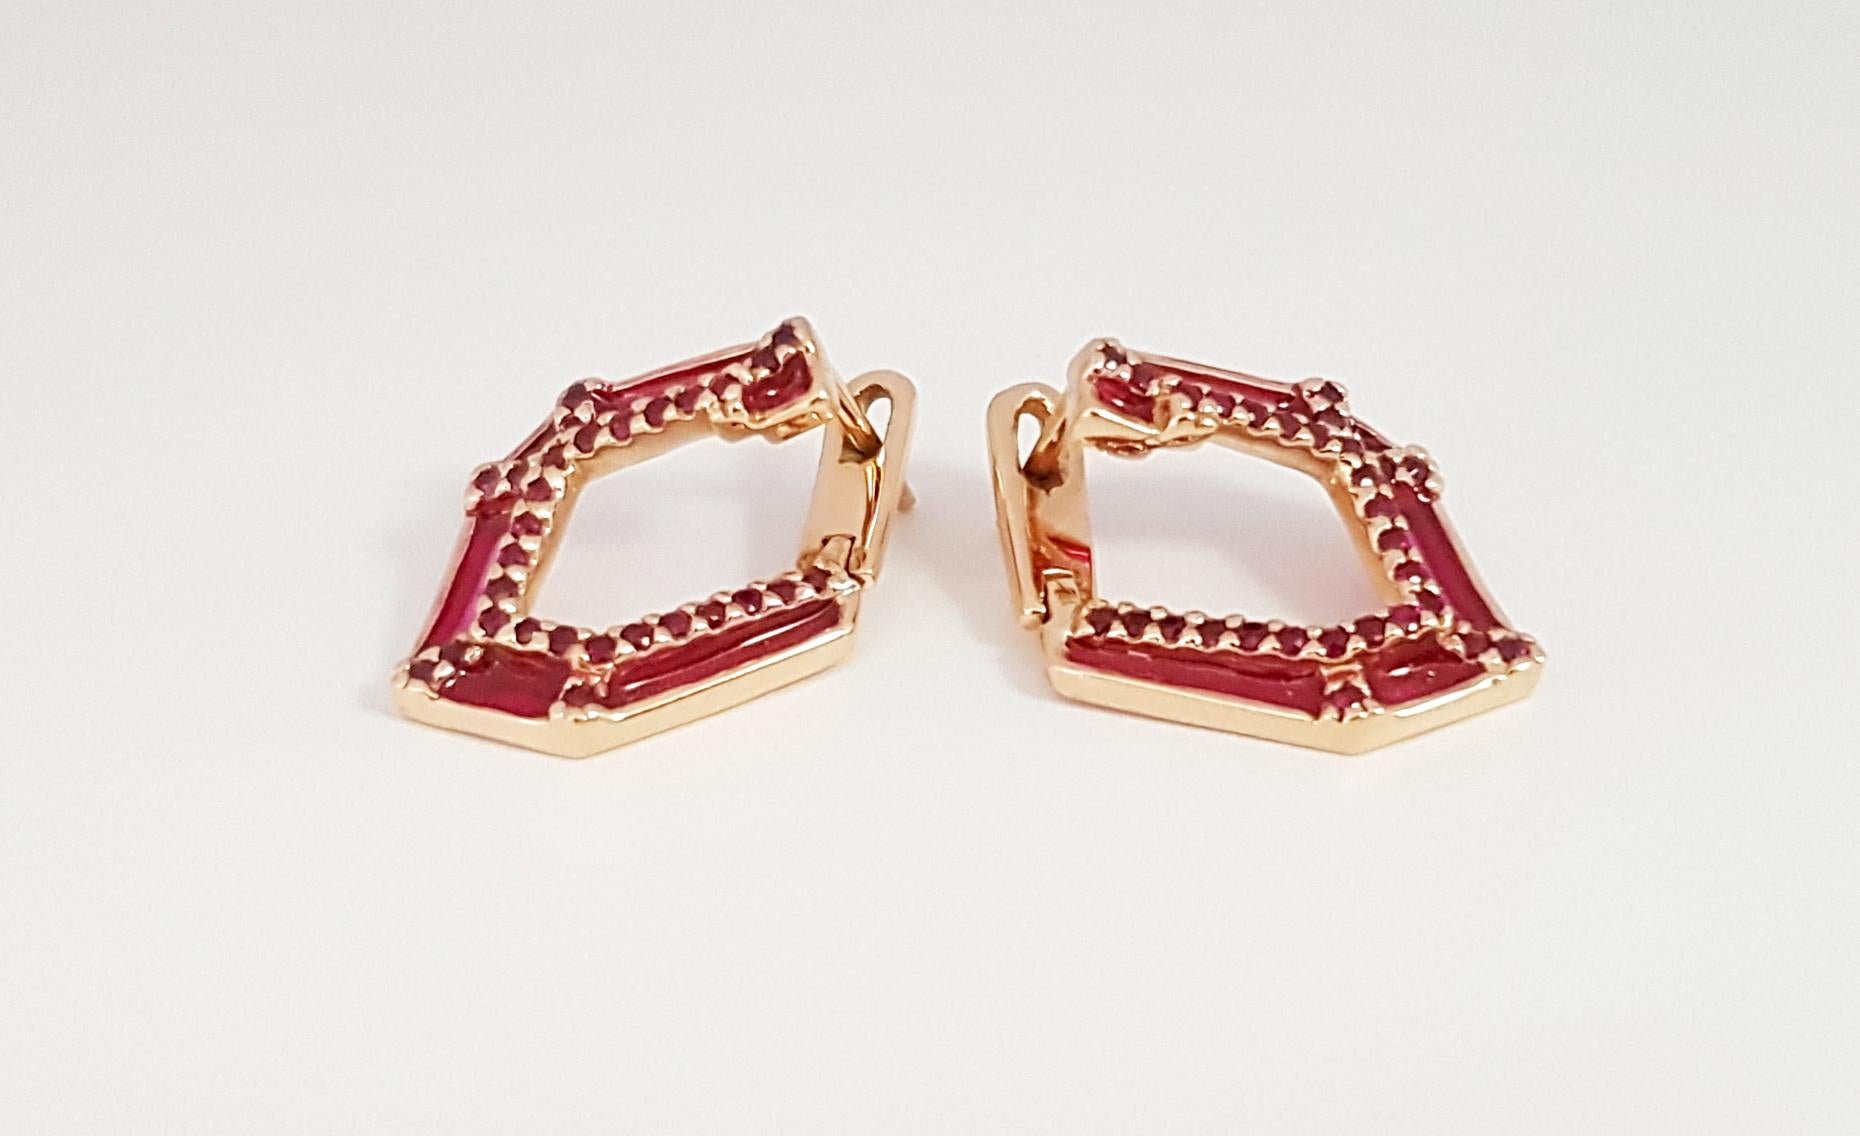 Round Cut Origami Link No. 5 Ruby with Enamel Earrings 18K Rose Gold Petite For Sale